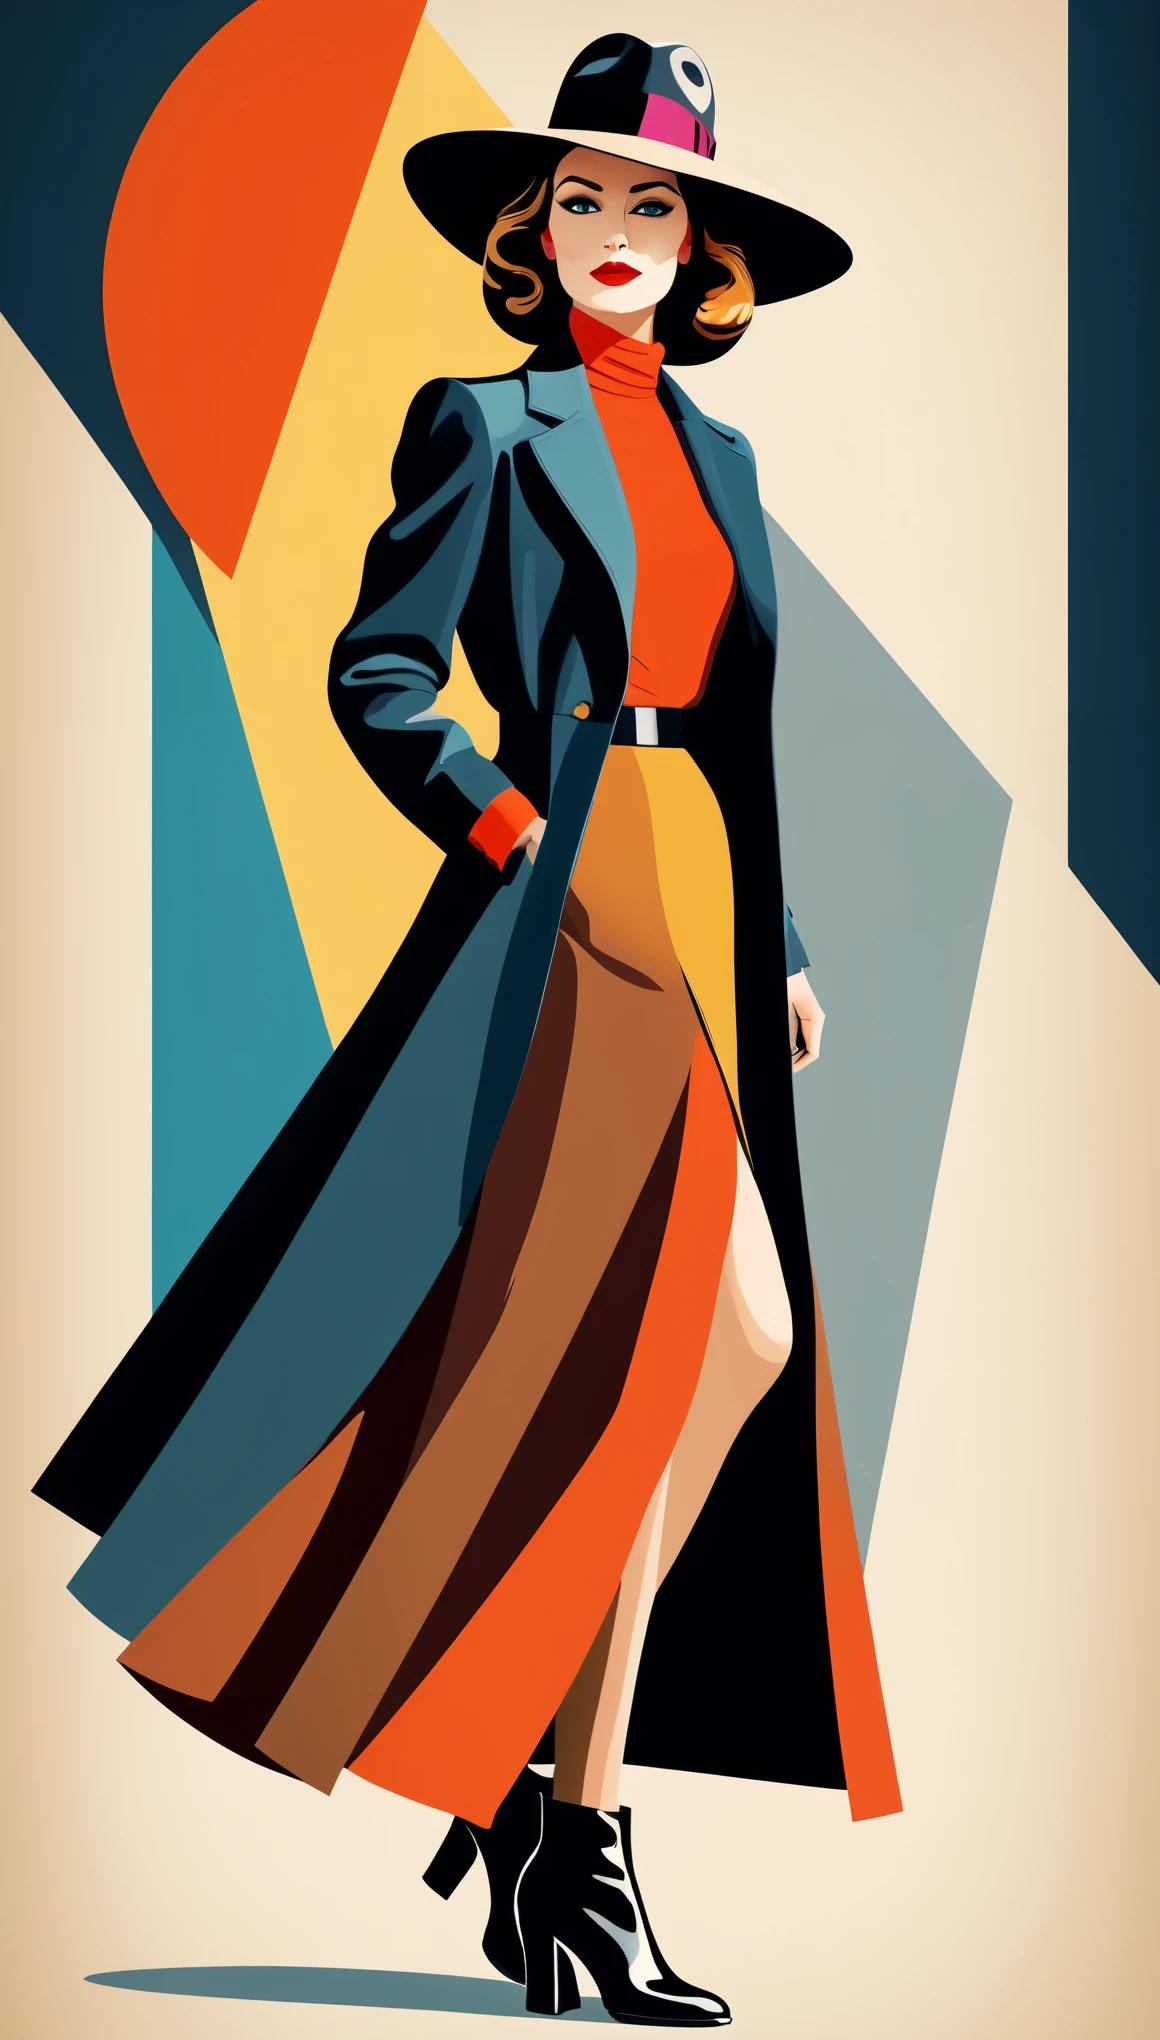 (vector art:1.5),masterpiece,best quality,1lady,standing,boots,long skirt,jacket,hat,full body,perfect proportions,solid colors,spy movie poster,gorgeous color grading,harmonious colors,bauhaus,shapes,lines,abstract